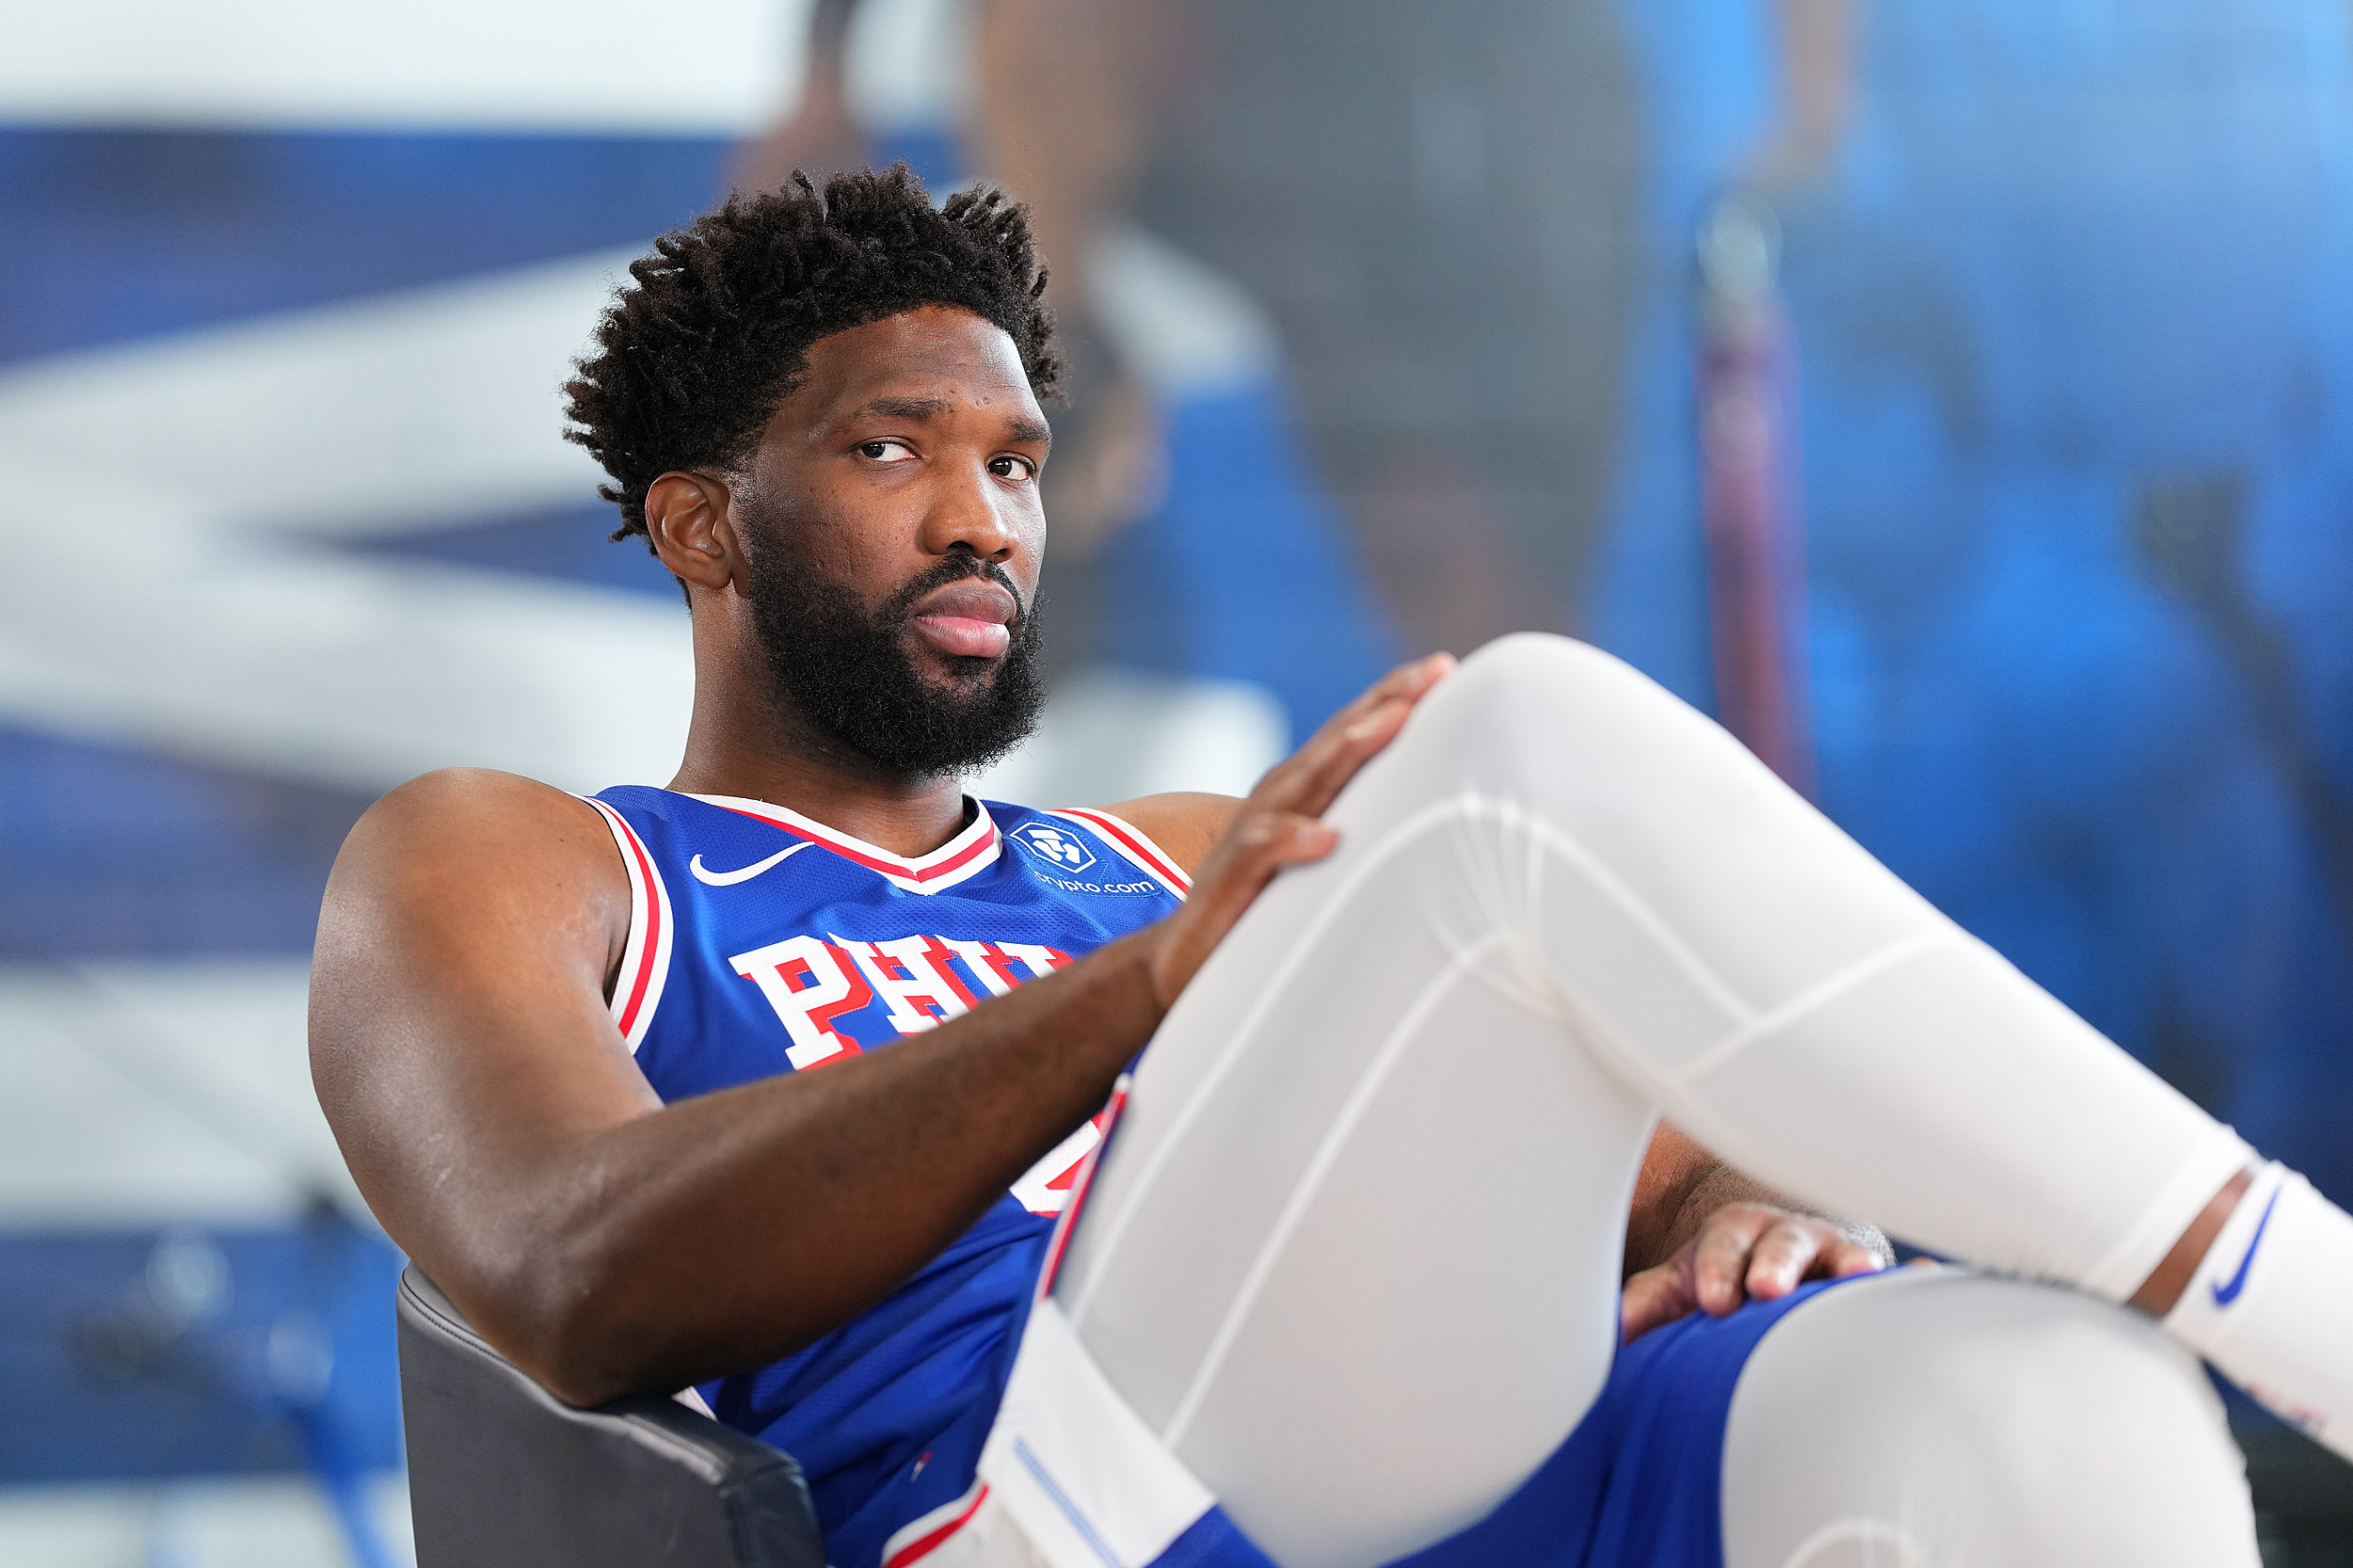 DeAndre Jordan isn't the answer behind Joel Embiid for Sixers